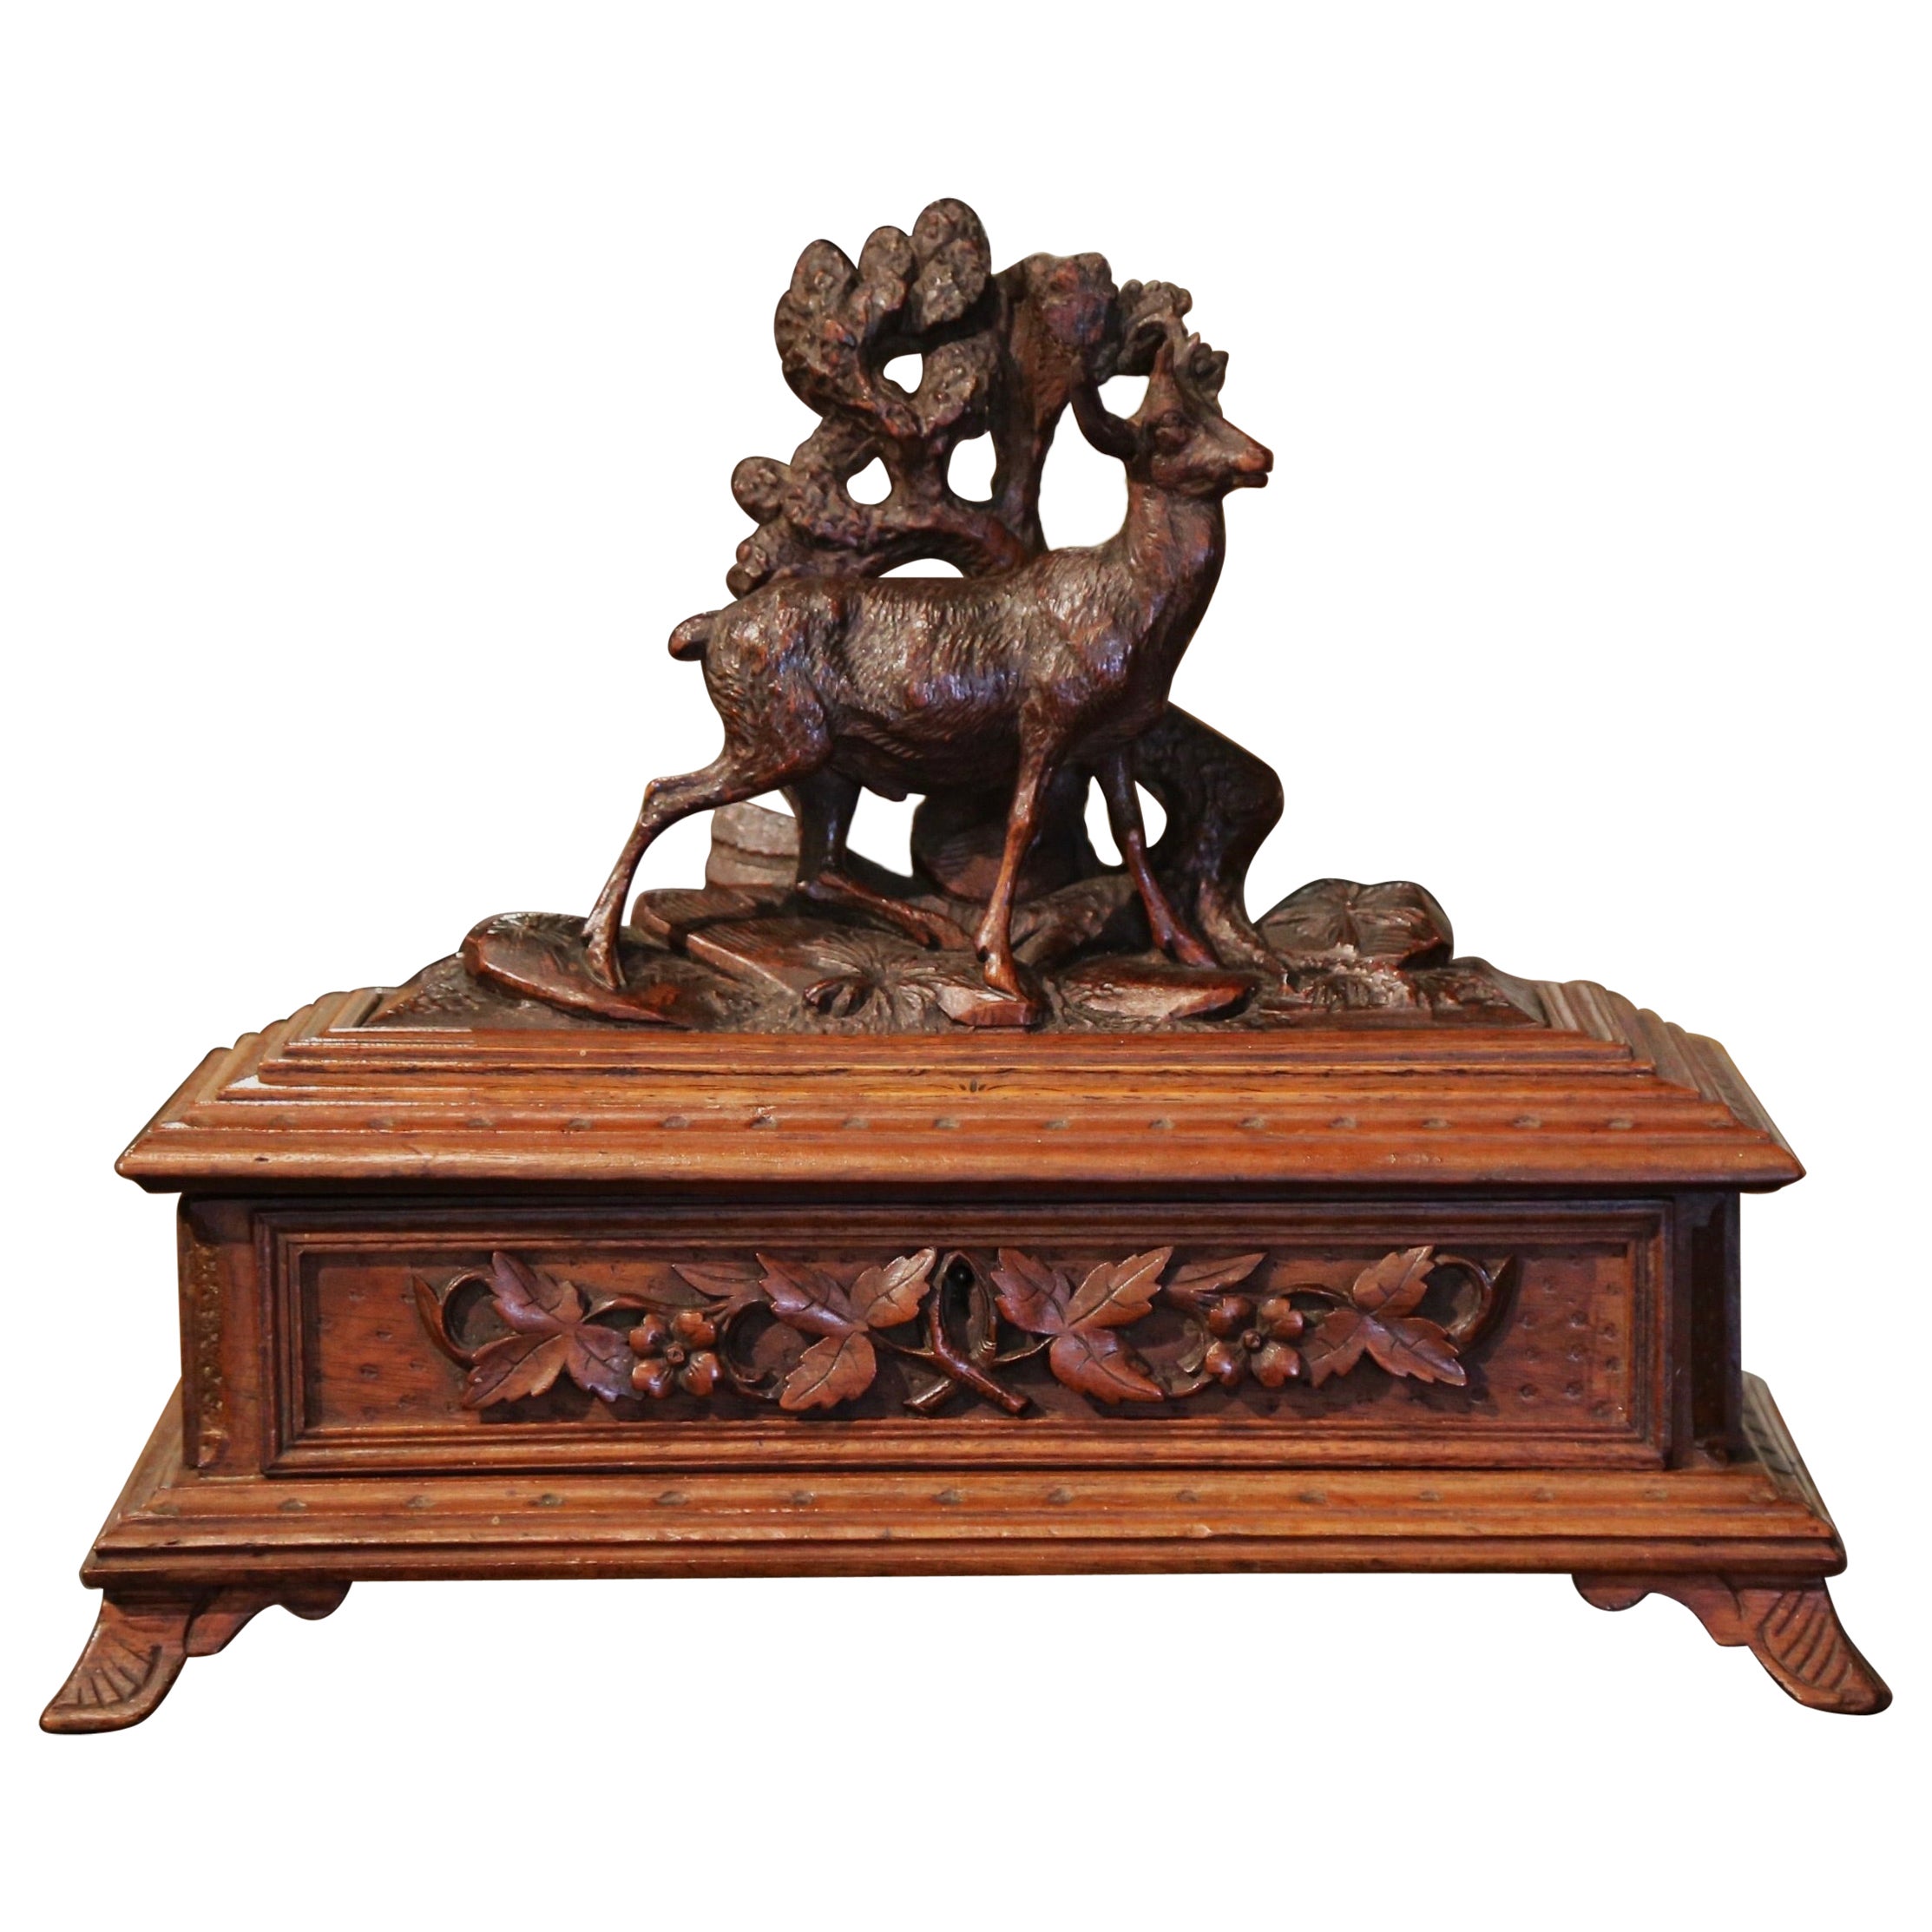 19th Century French Black Forest Carved Walnut Jewelry Box with Deer Motifs